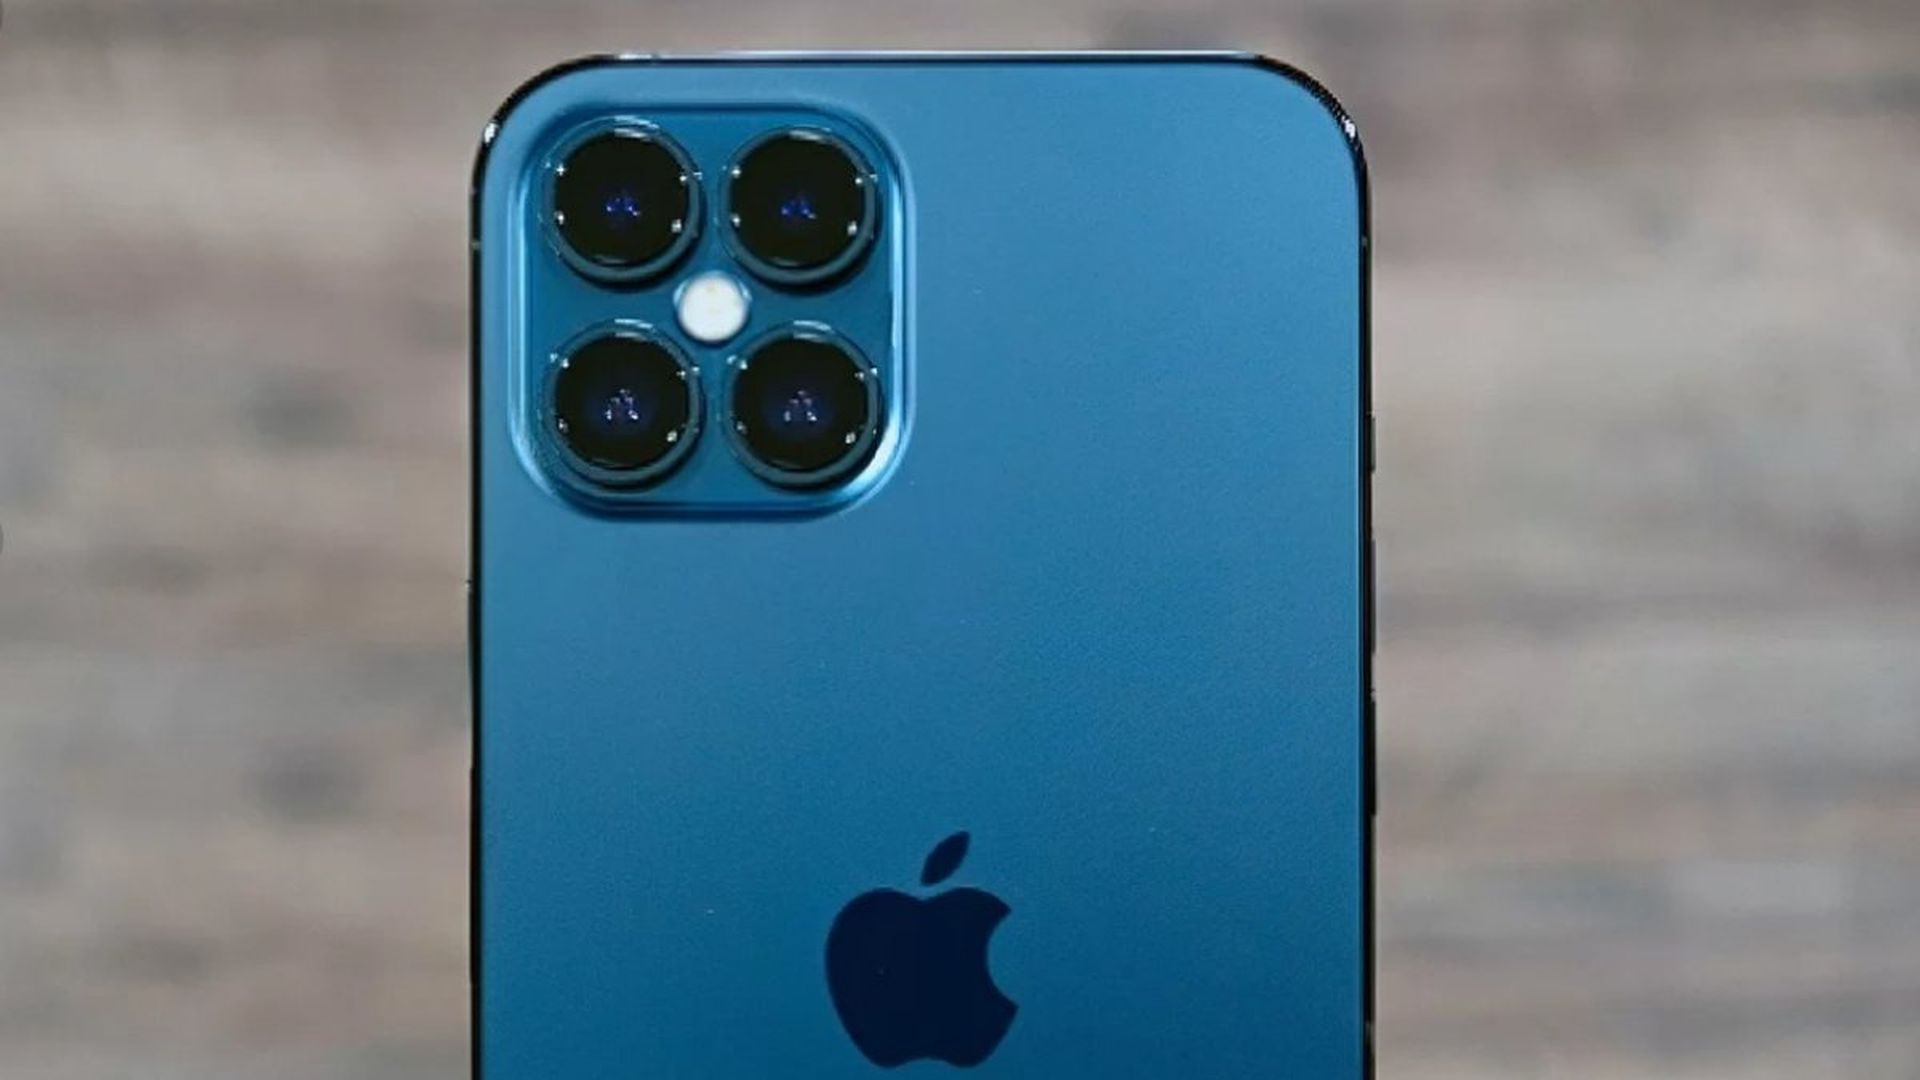 We have gathered all iPhone 14 Pro leaks for those who want to know more about its specs, price, release date, design, cameras, battery life, and more.